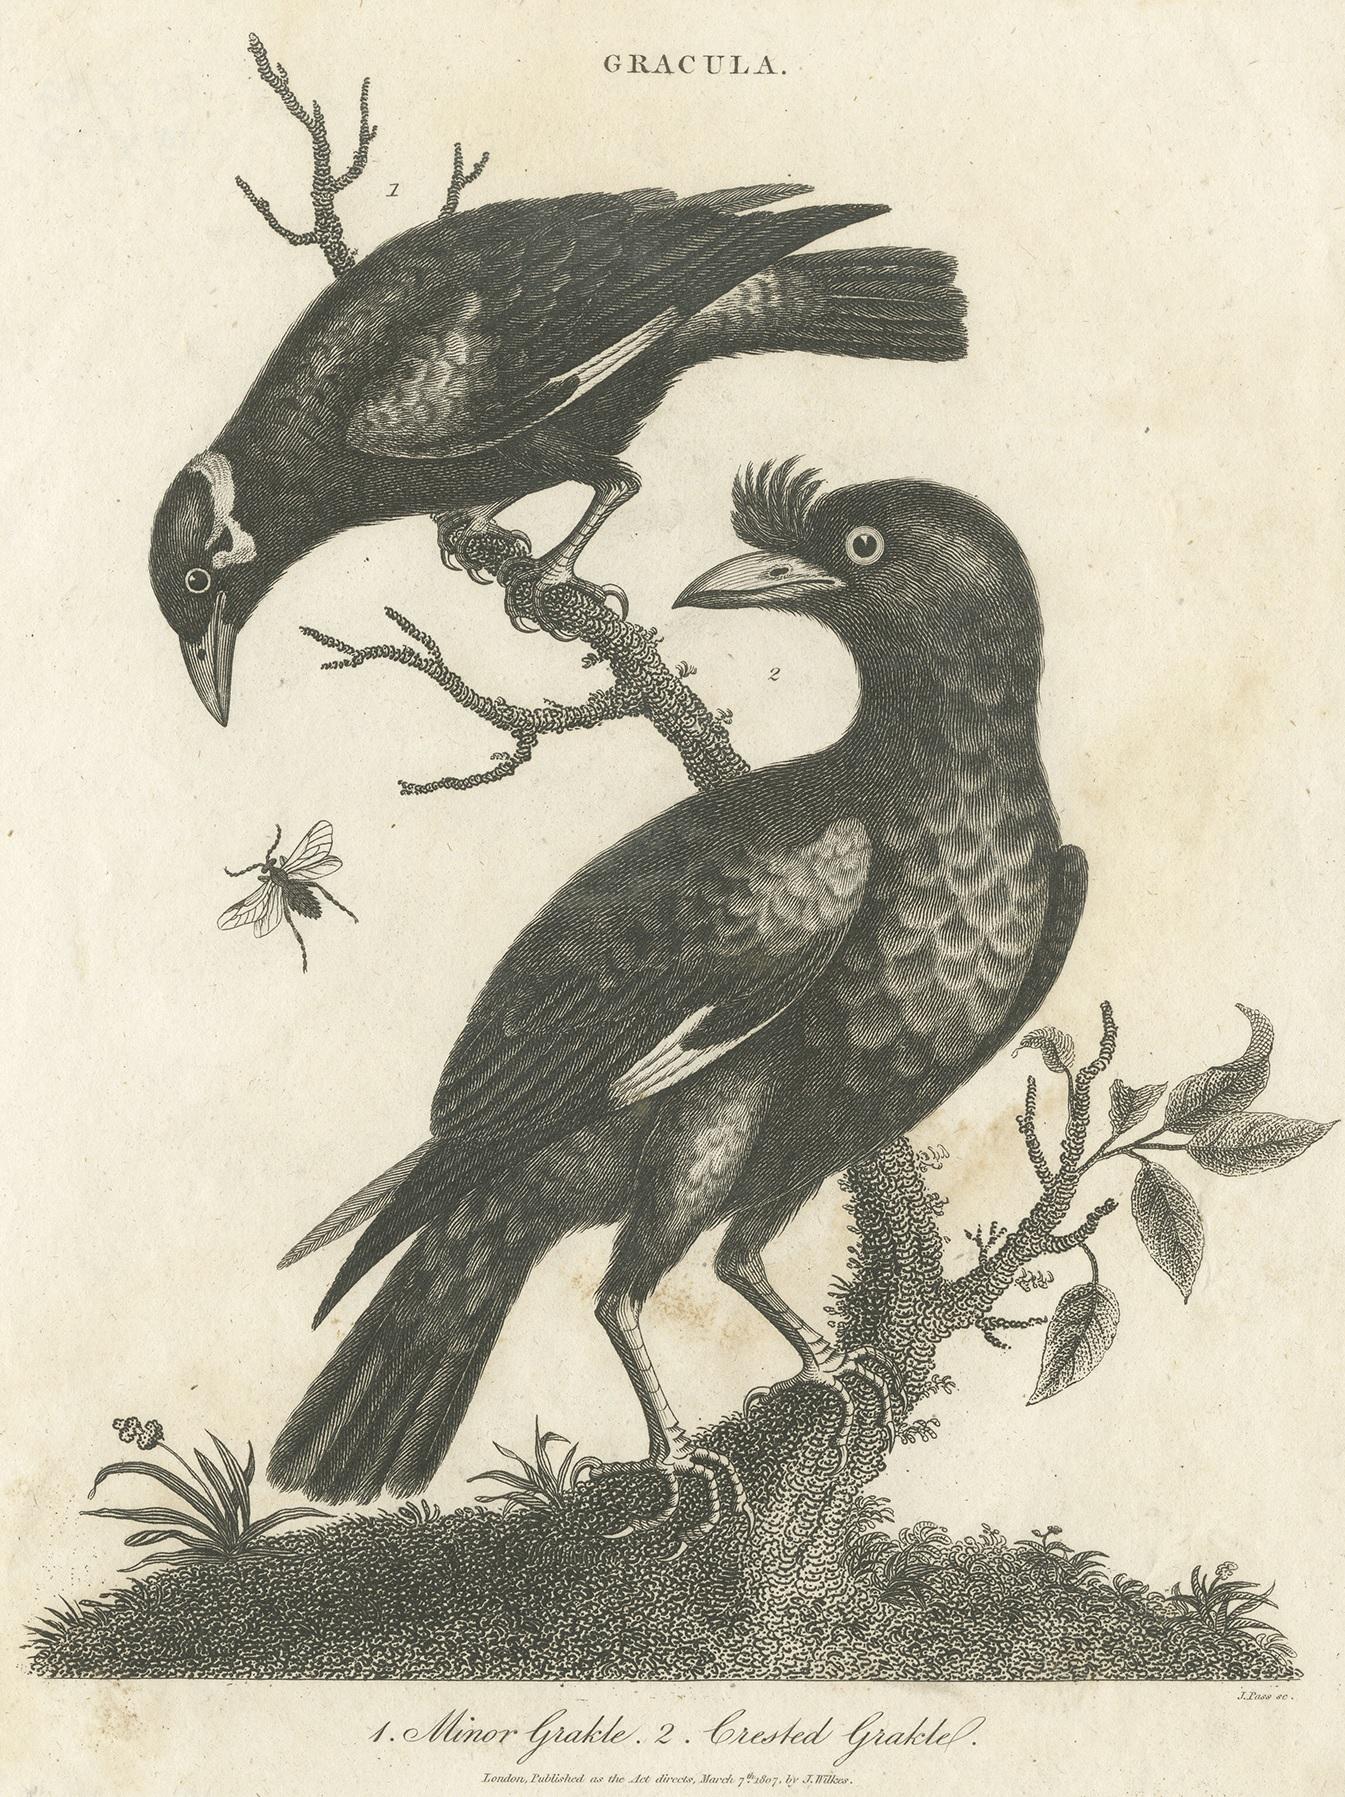 Antique bird print titled 'Gracula - Minor Grakle - Crested Grakle'. Antique print of Grackle birds. This print originates from 'Encyclopedia Londinensis' published by J. Wilkes.